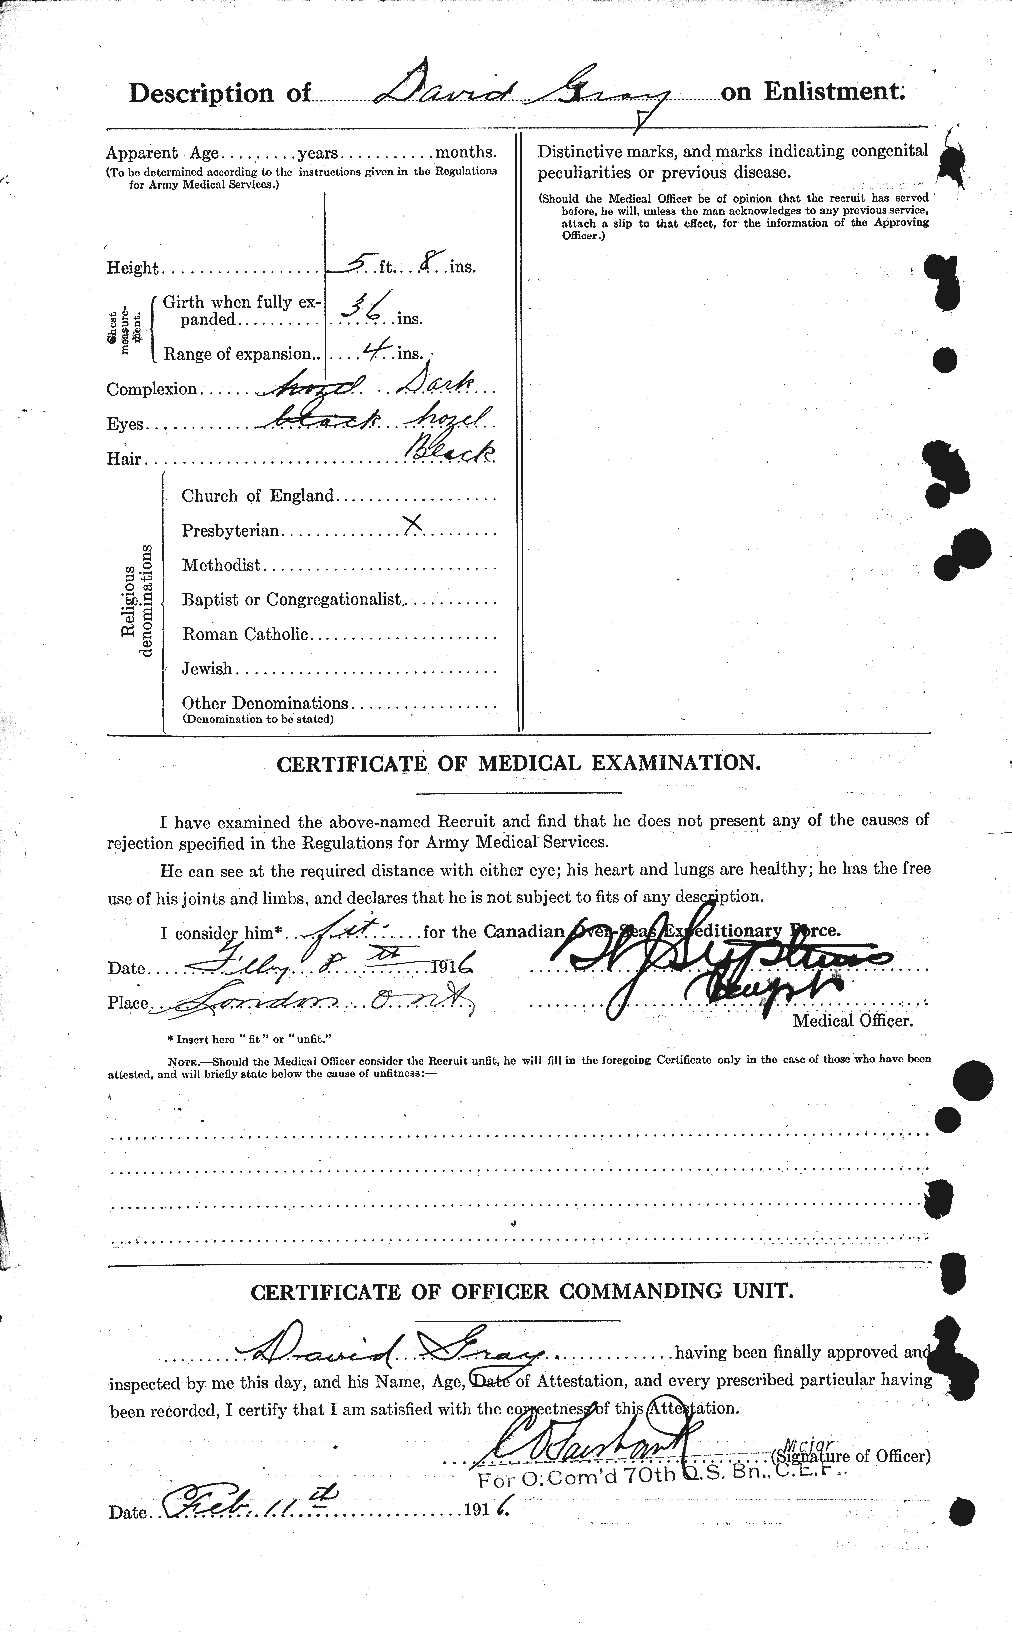 Personnel Records of the First World War - CEF 361468b